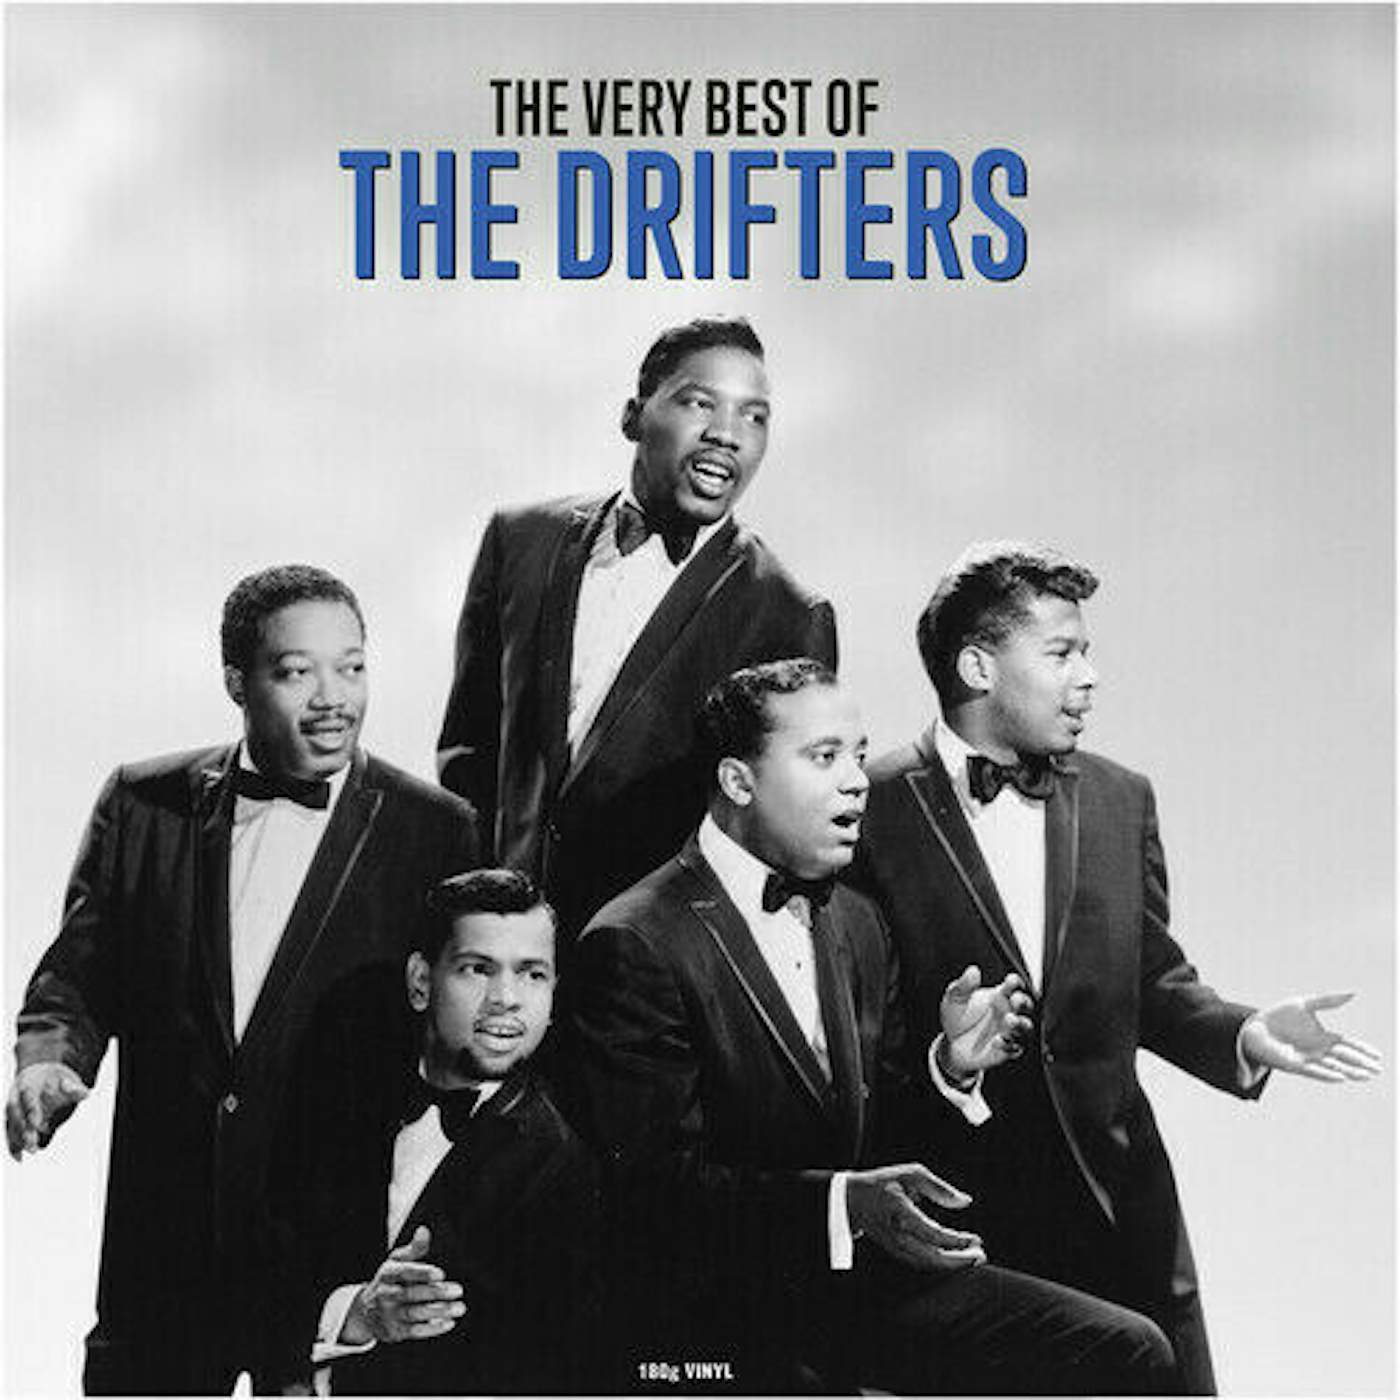 The Drifters VERY BEST OF Vinyl Record